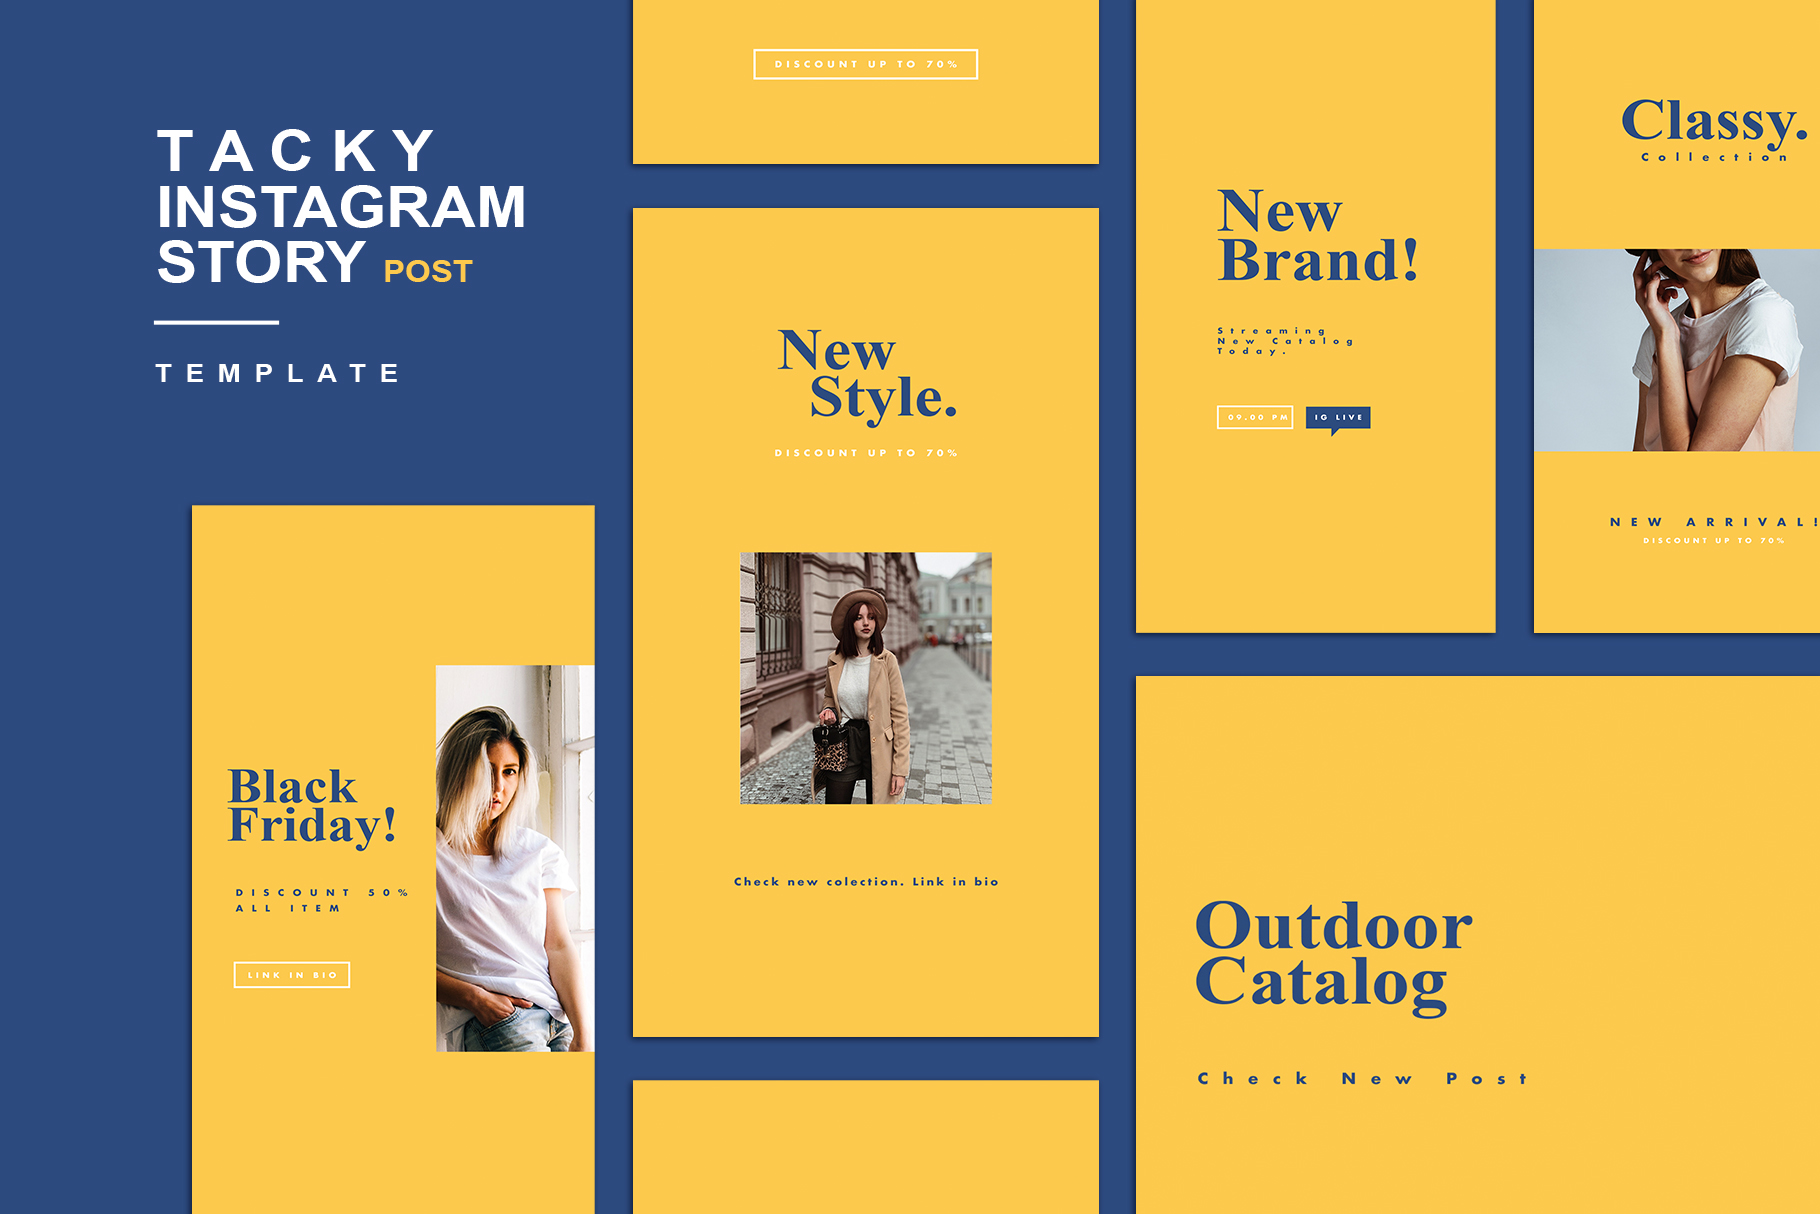 Download Tacky Instagram Story Post Photoshop Template Psd File PSD Mockup Templates